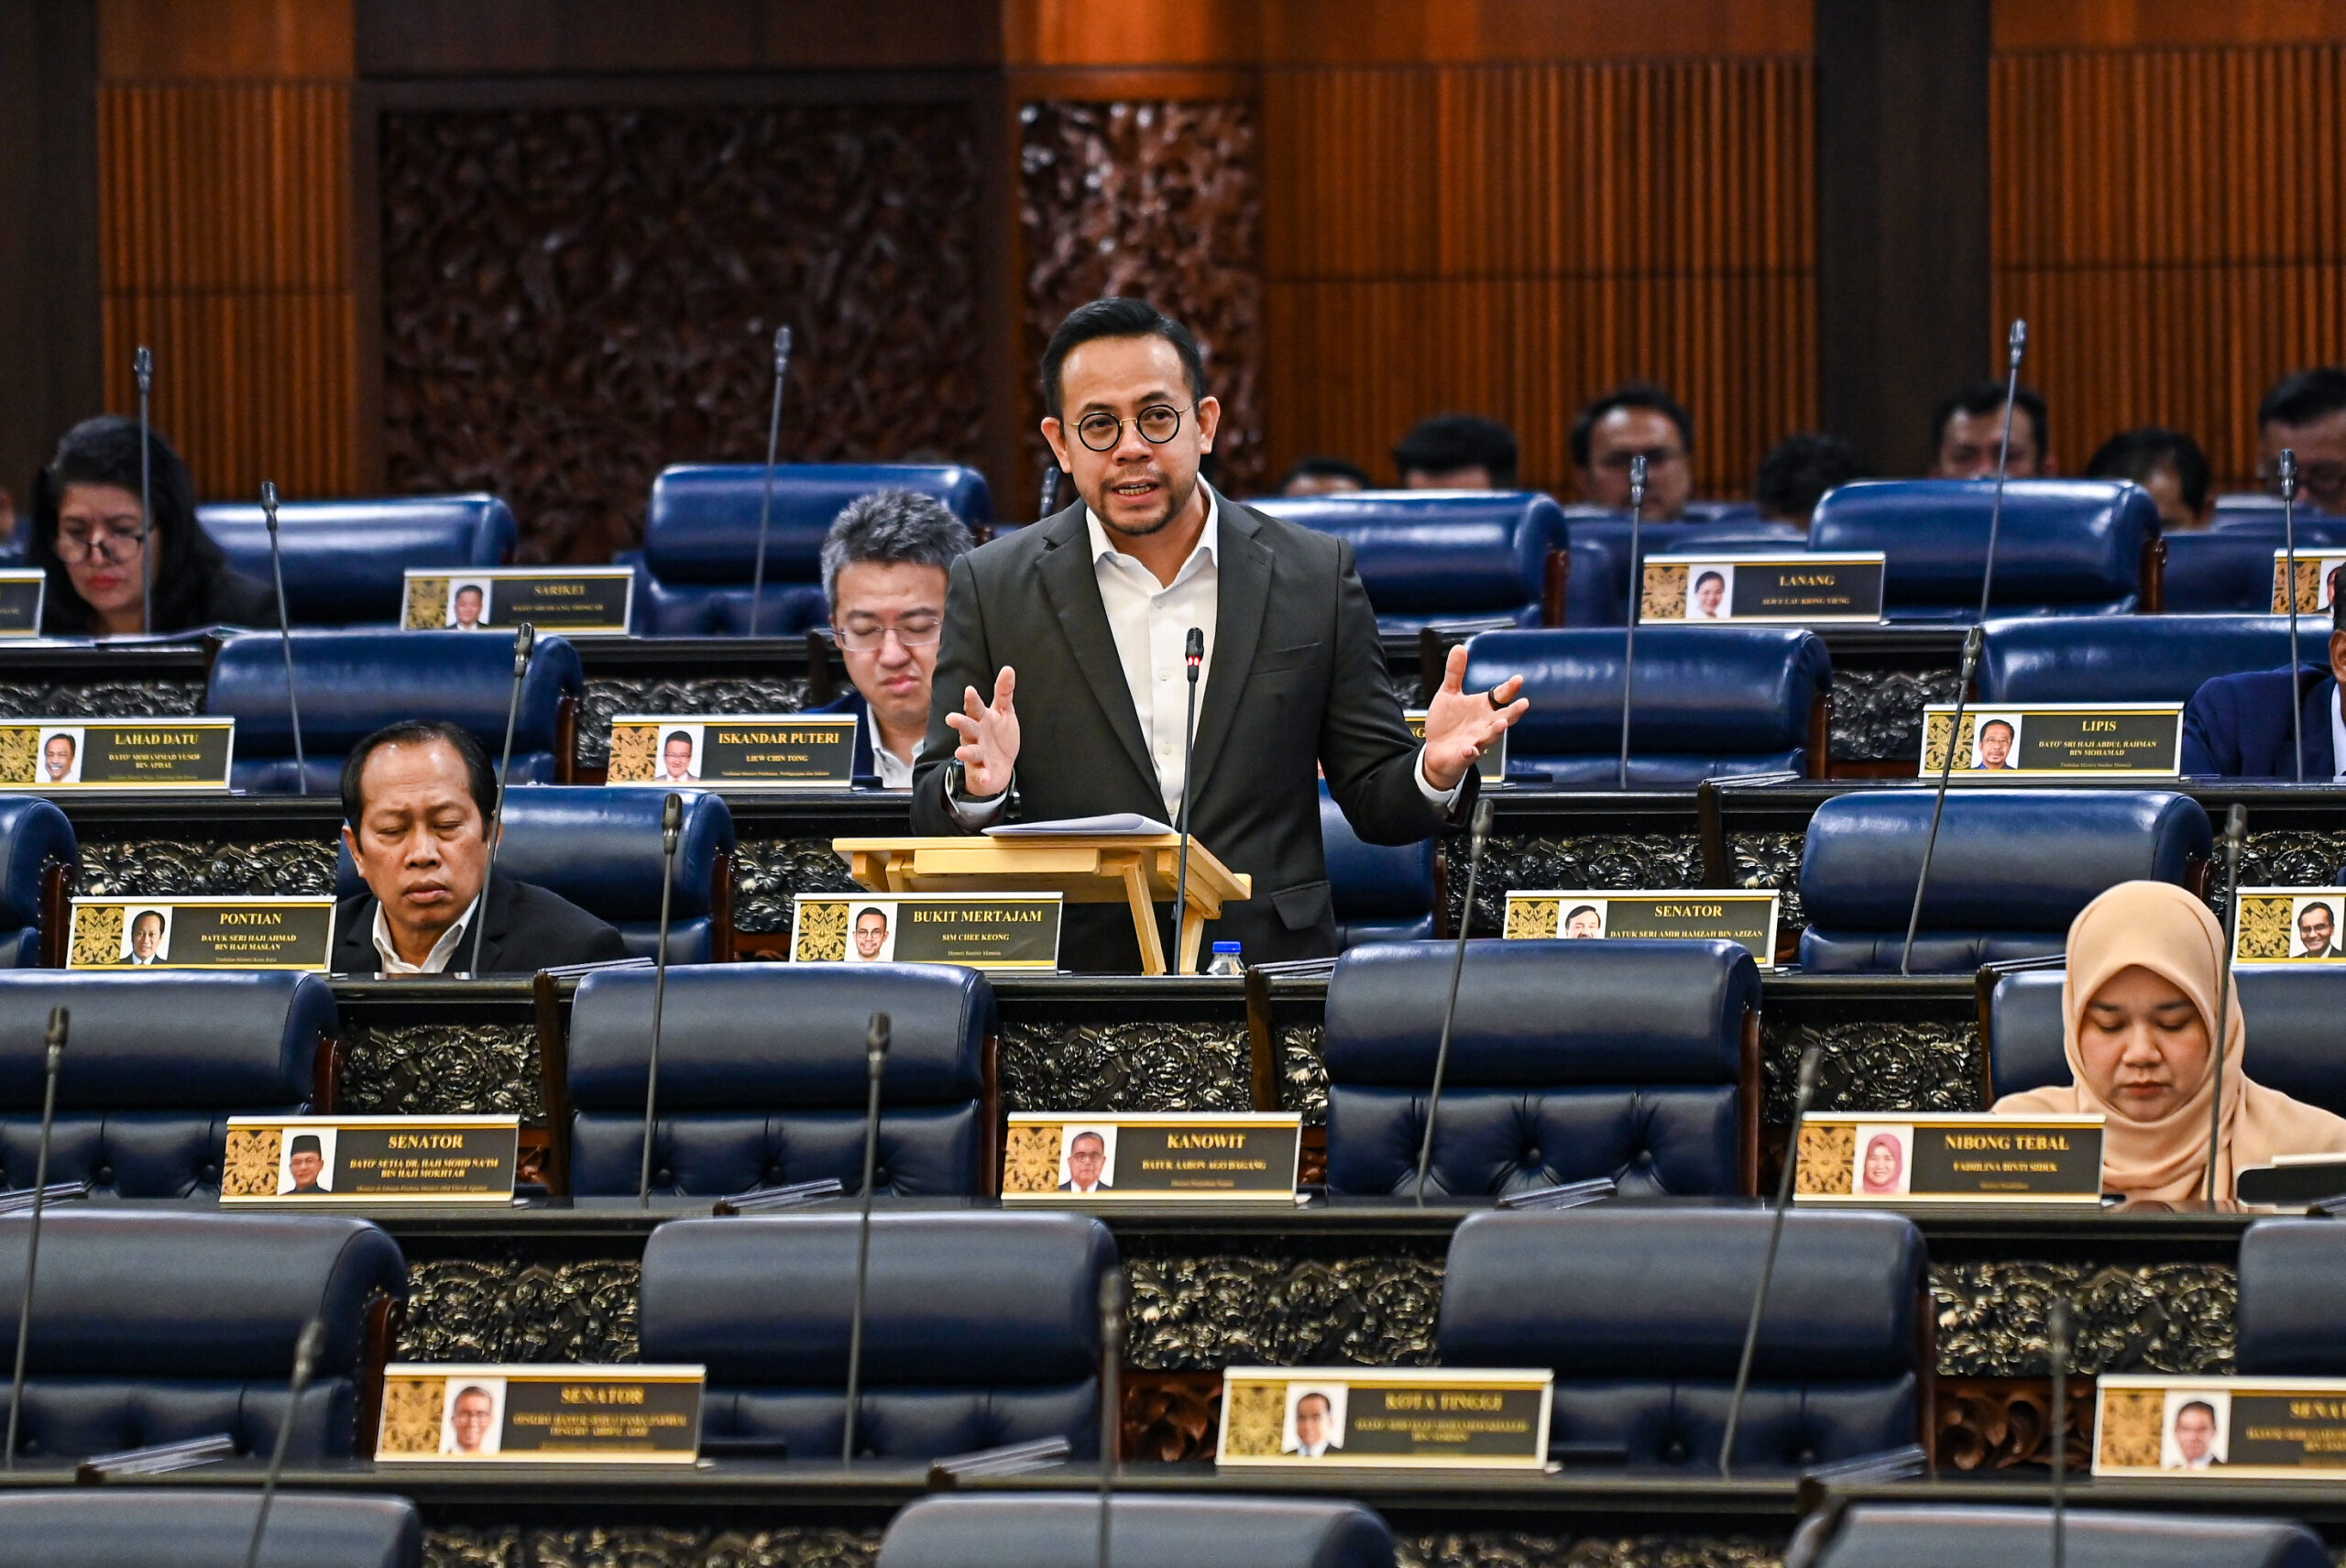 Amendments to raise workers’ Socso insured salary ceiling to be tabled in Parliament this year